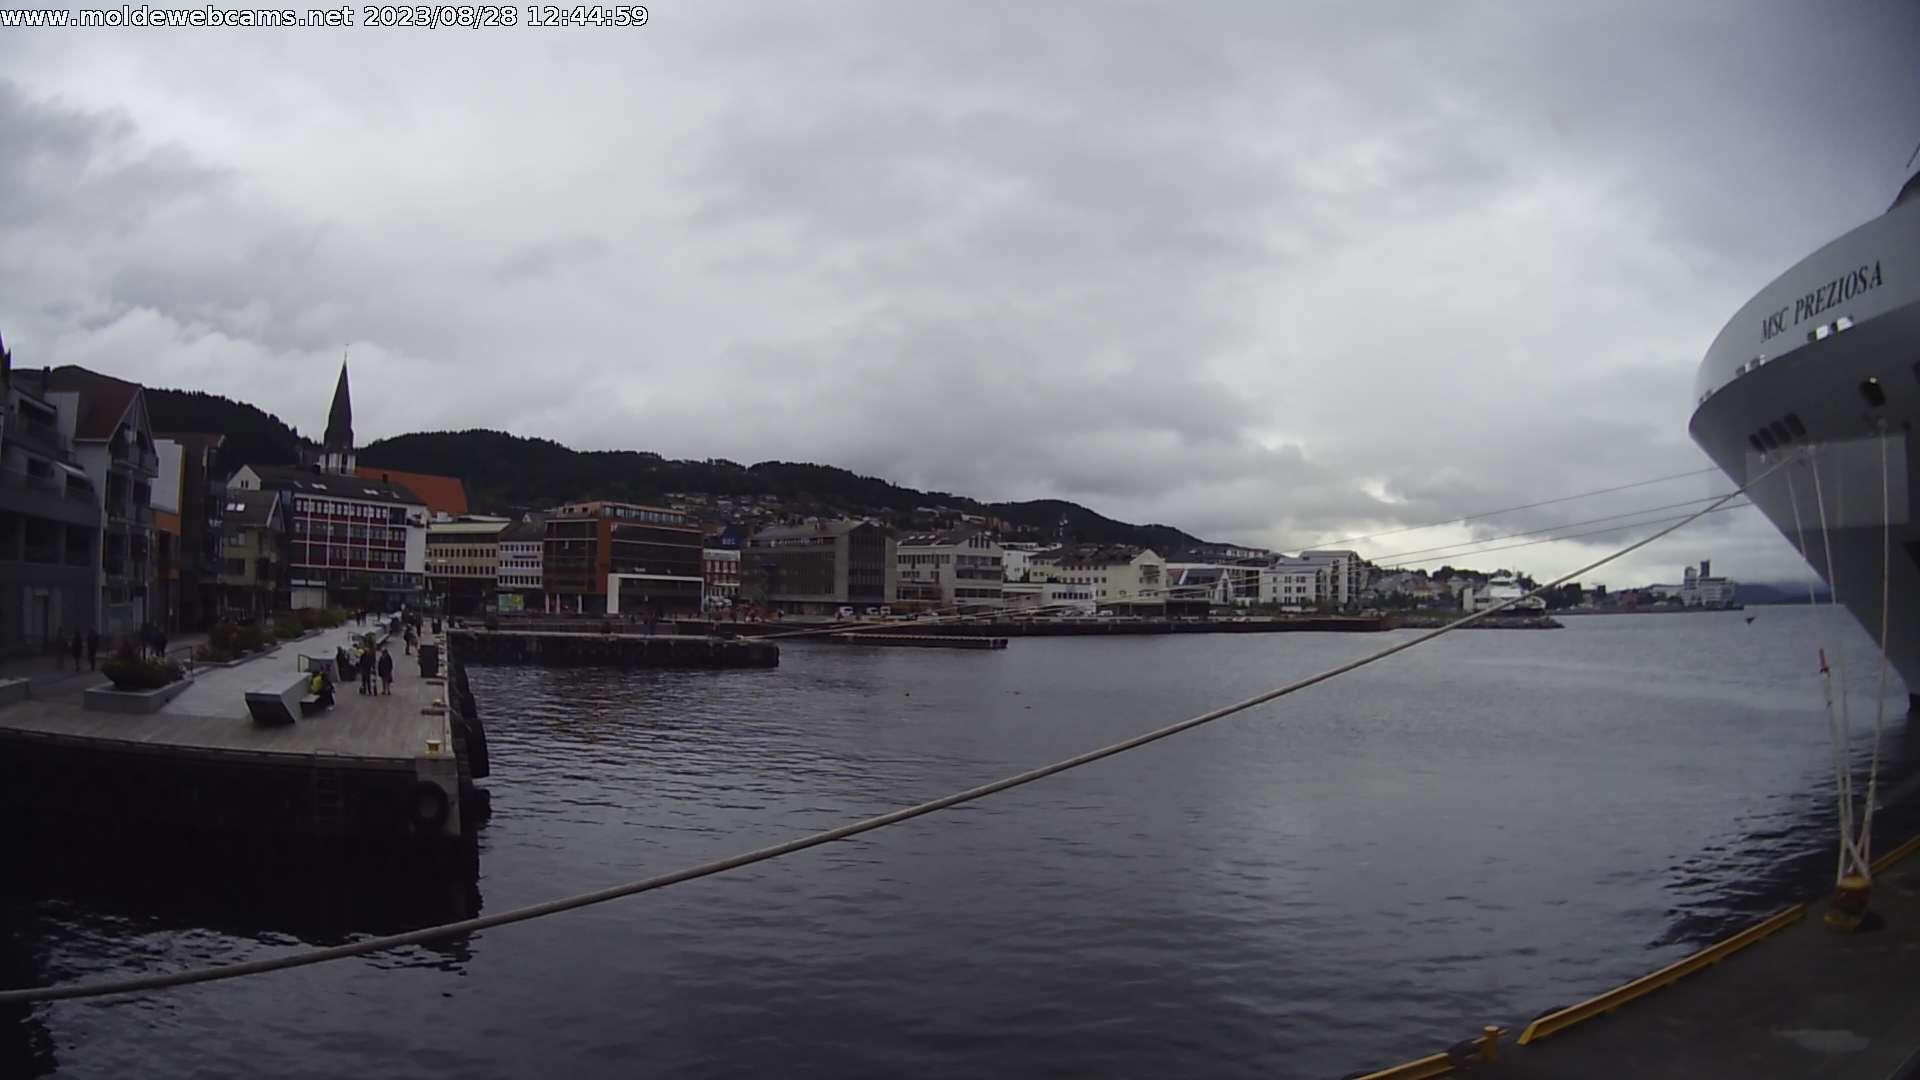 Webcam in Molde, view of the pier in the south-eastern part of the city